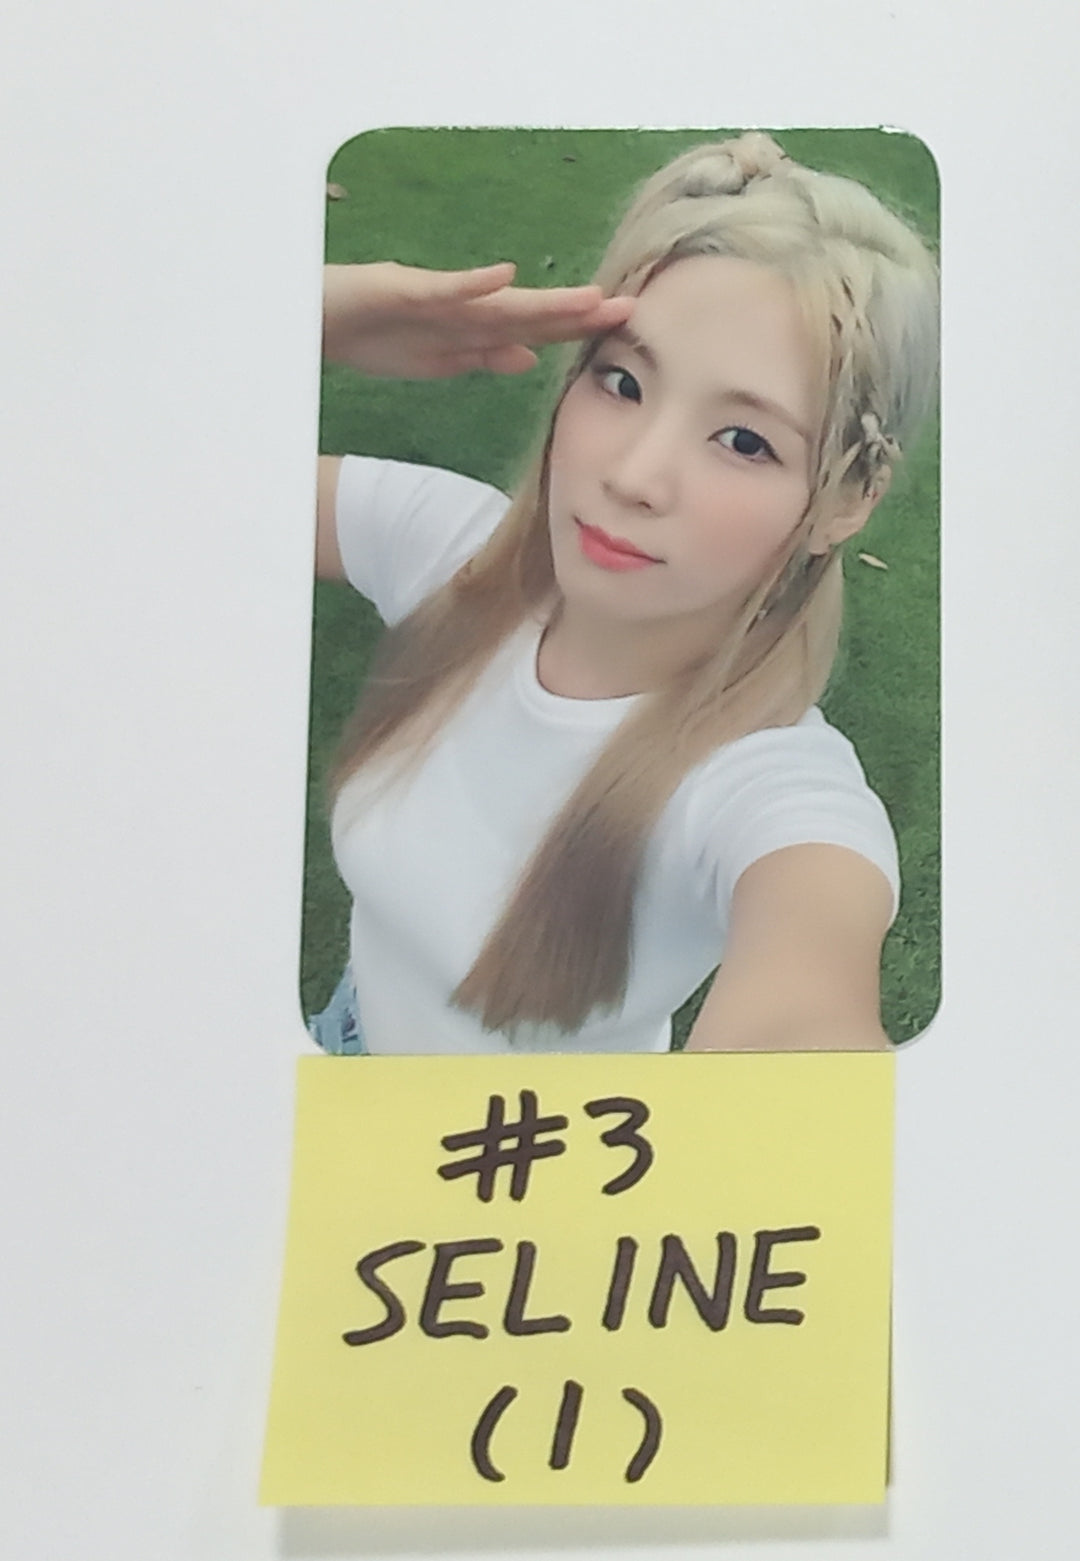 Cignature "Us in the Summer" - Official Photocard, Polaroid [23.09.13]